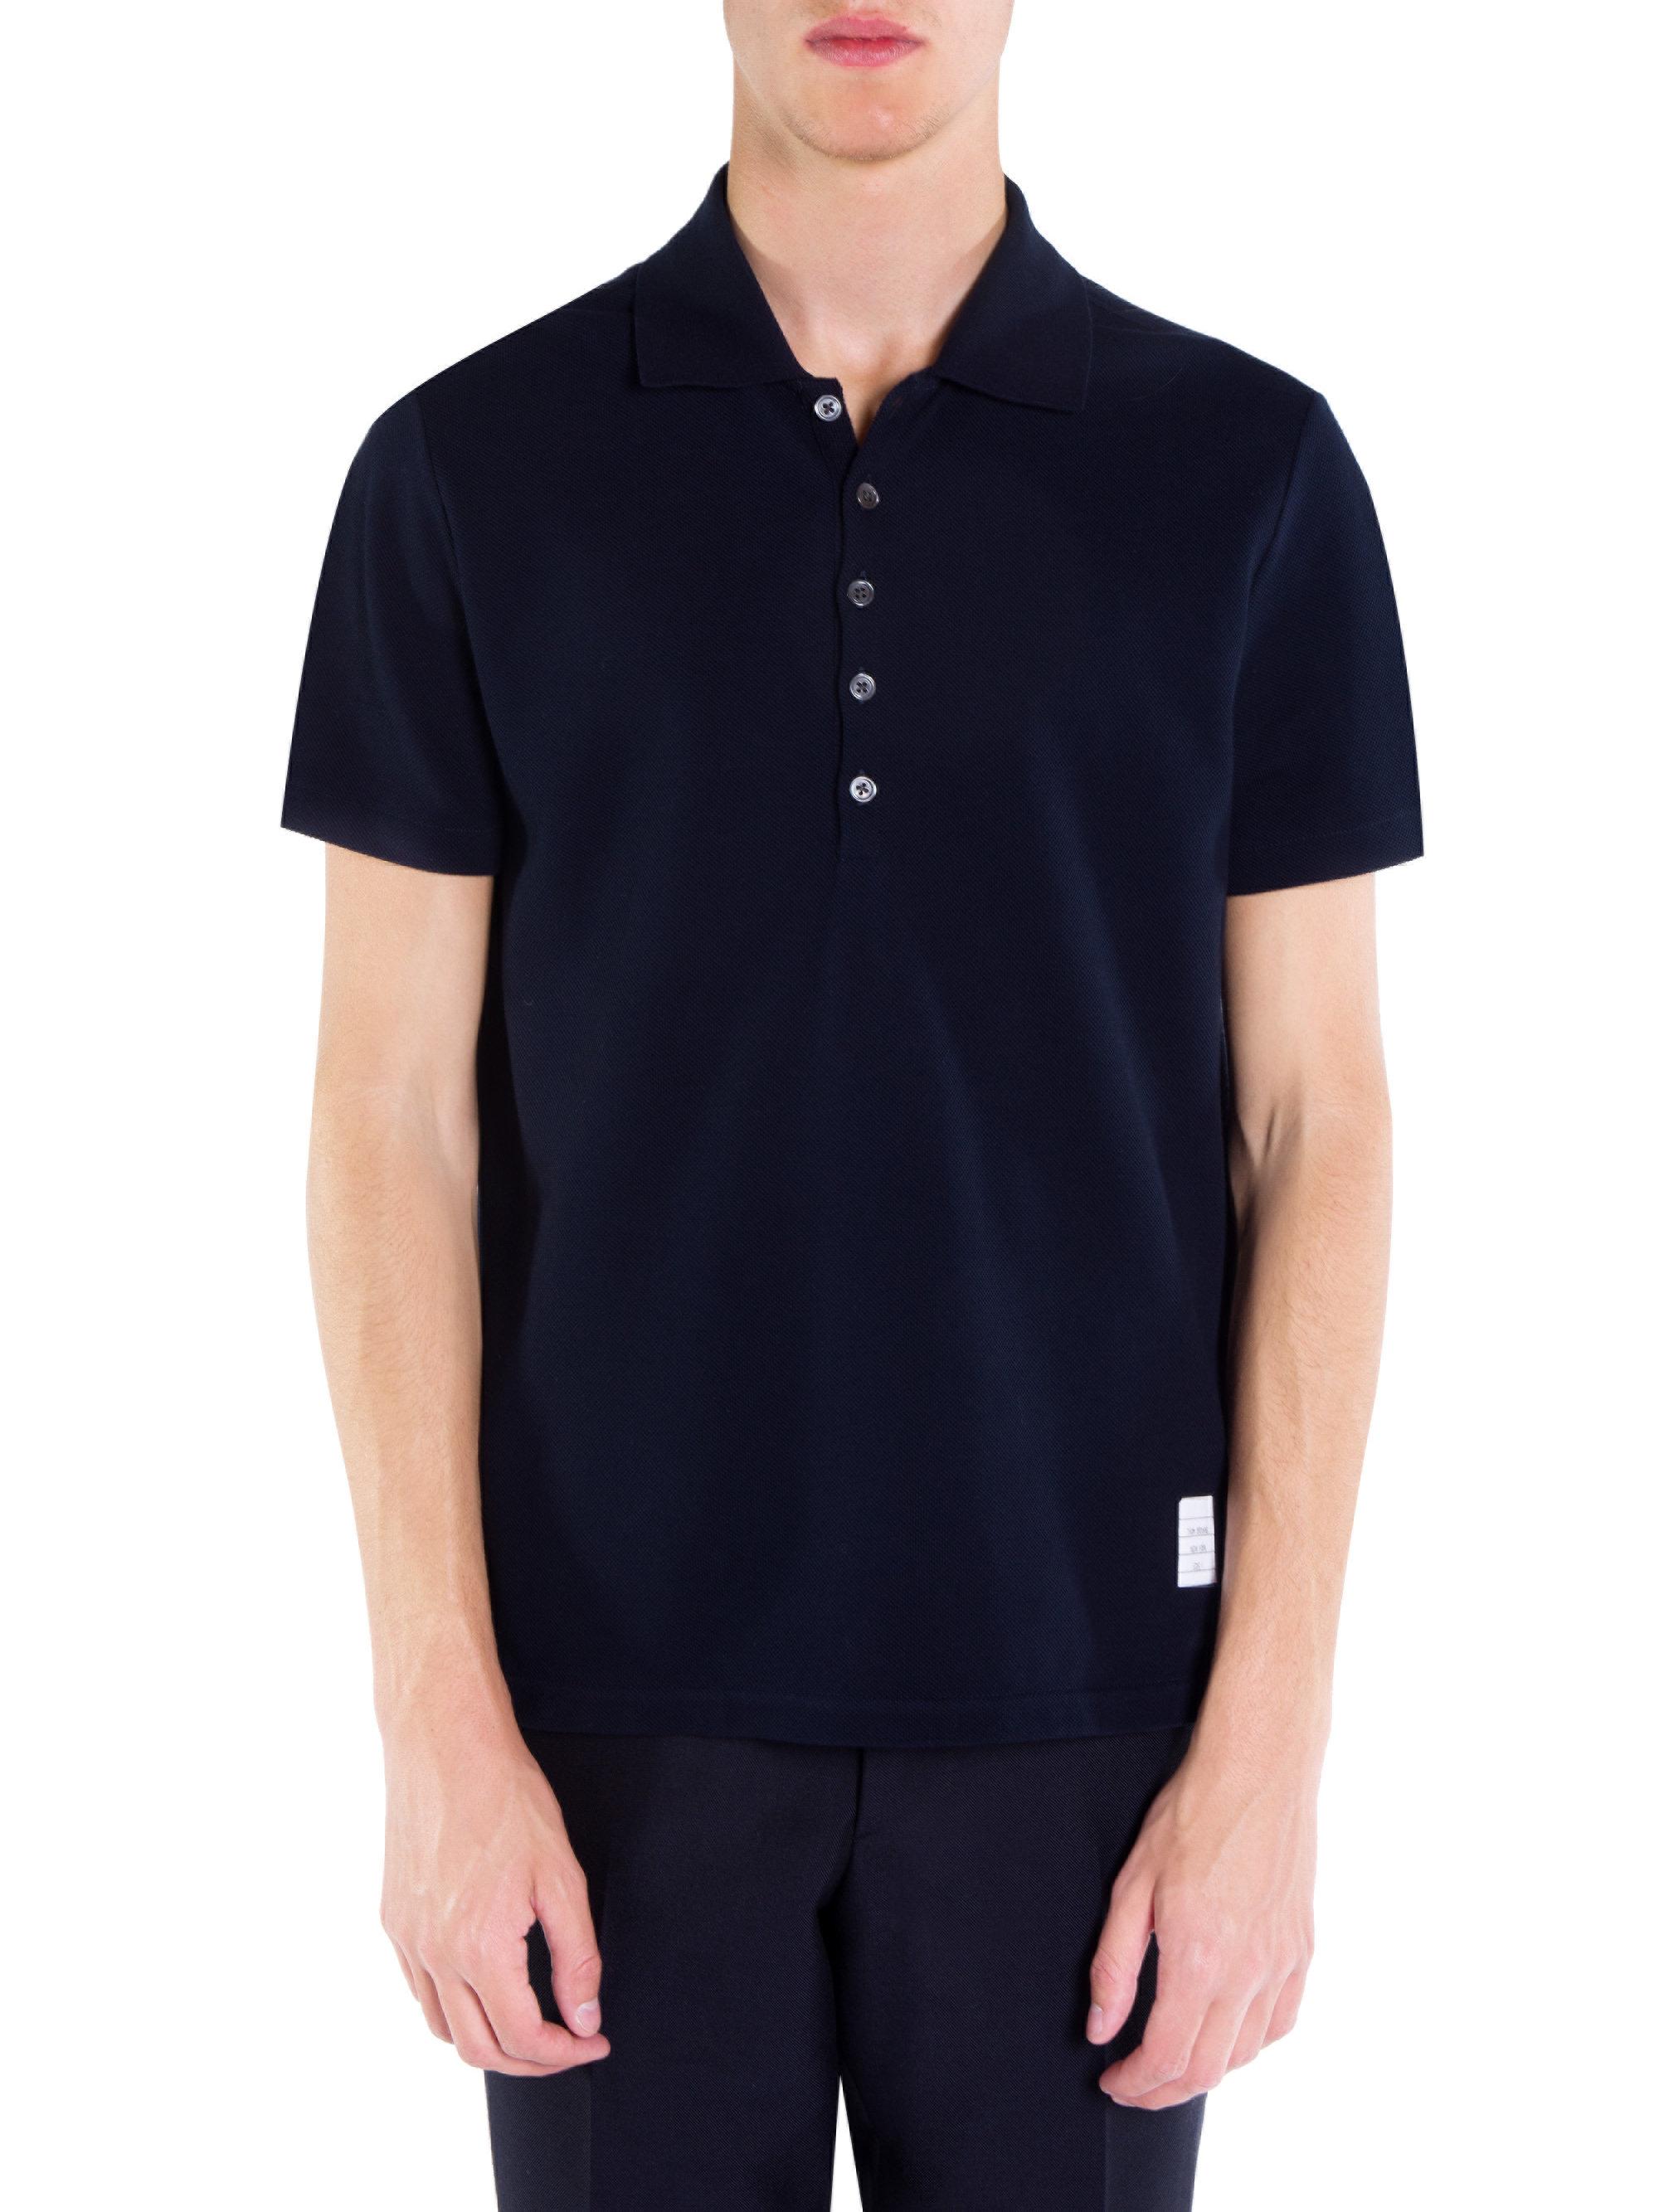 Lyst - Thom browne Short-sleeve Relaxed-fit Cotton Polo in Blue for Men